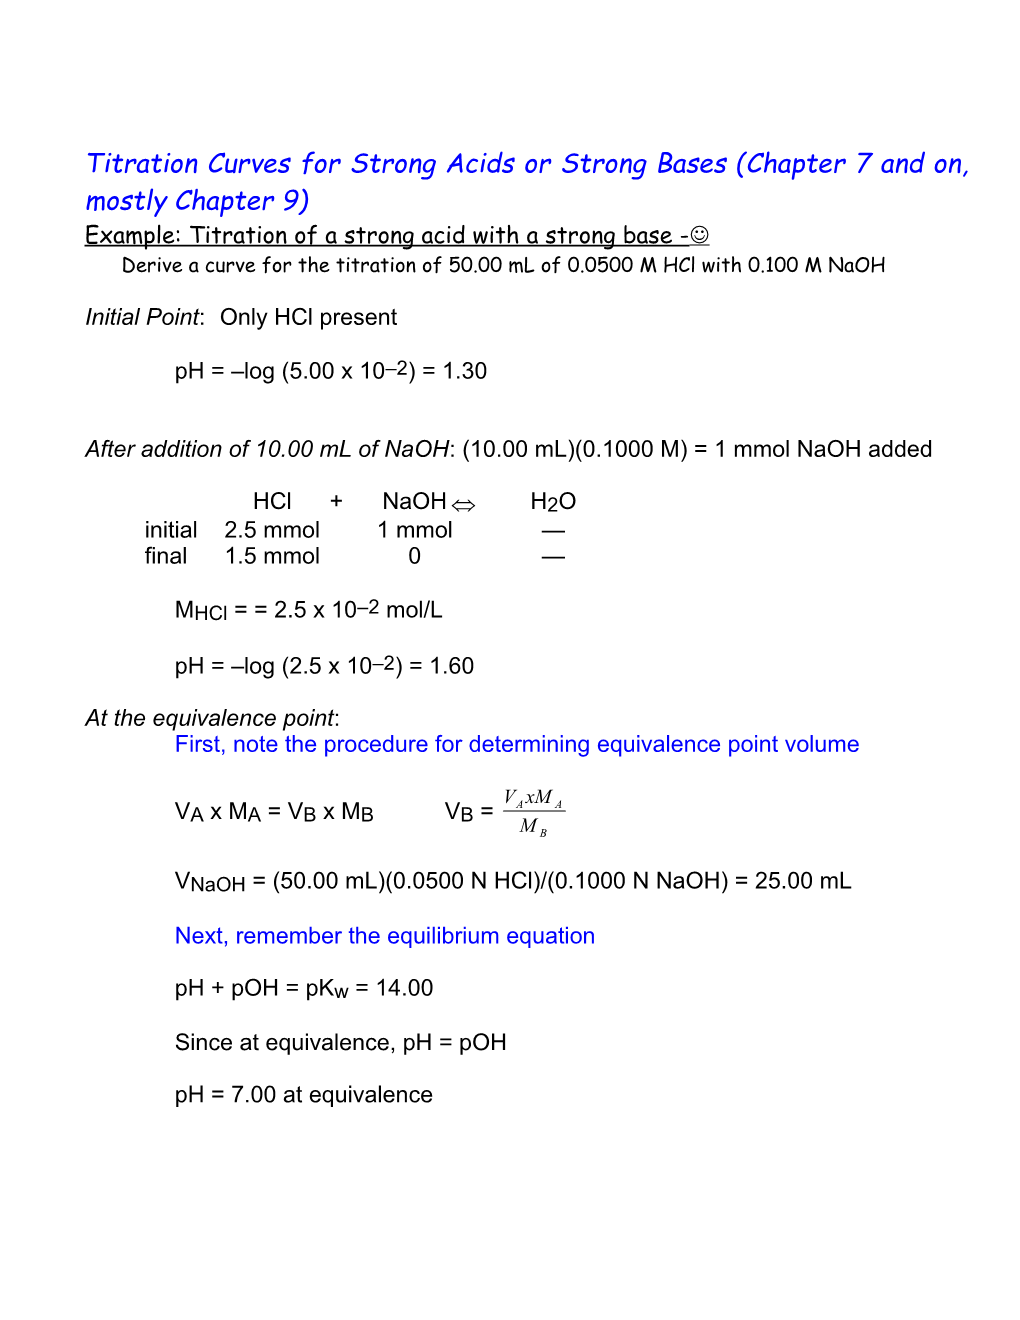 Titration Curves for Strong Acids Or Strong Bases (Chapter 7 and On, Mostly Chapter 9)